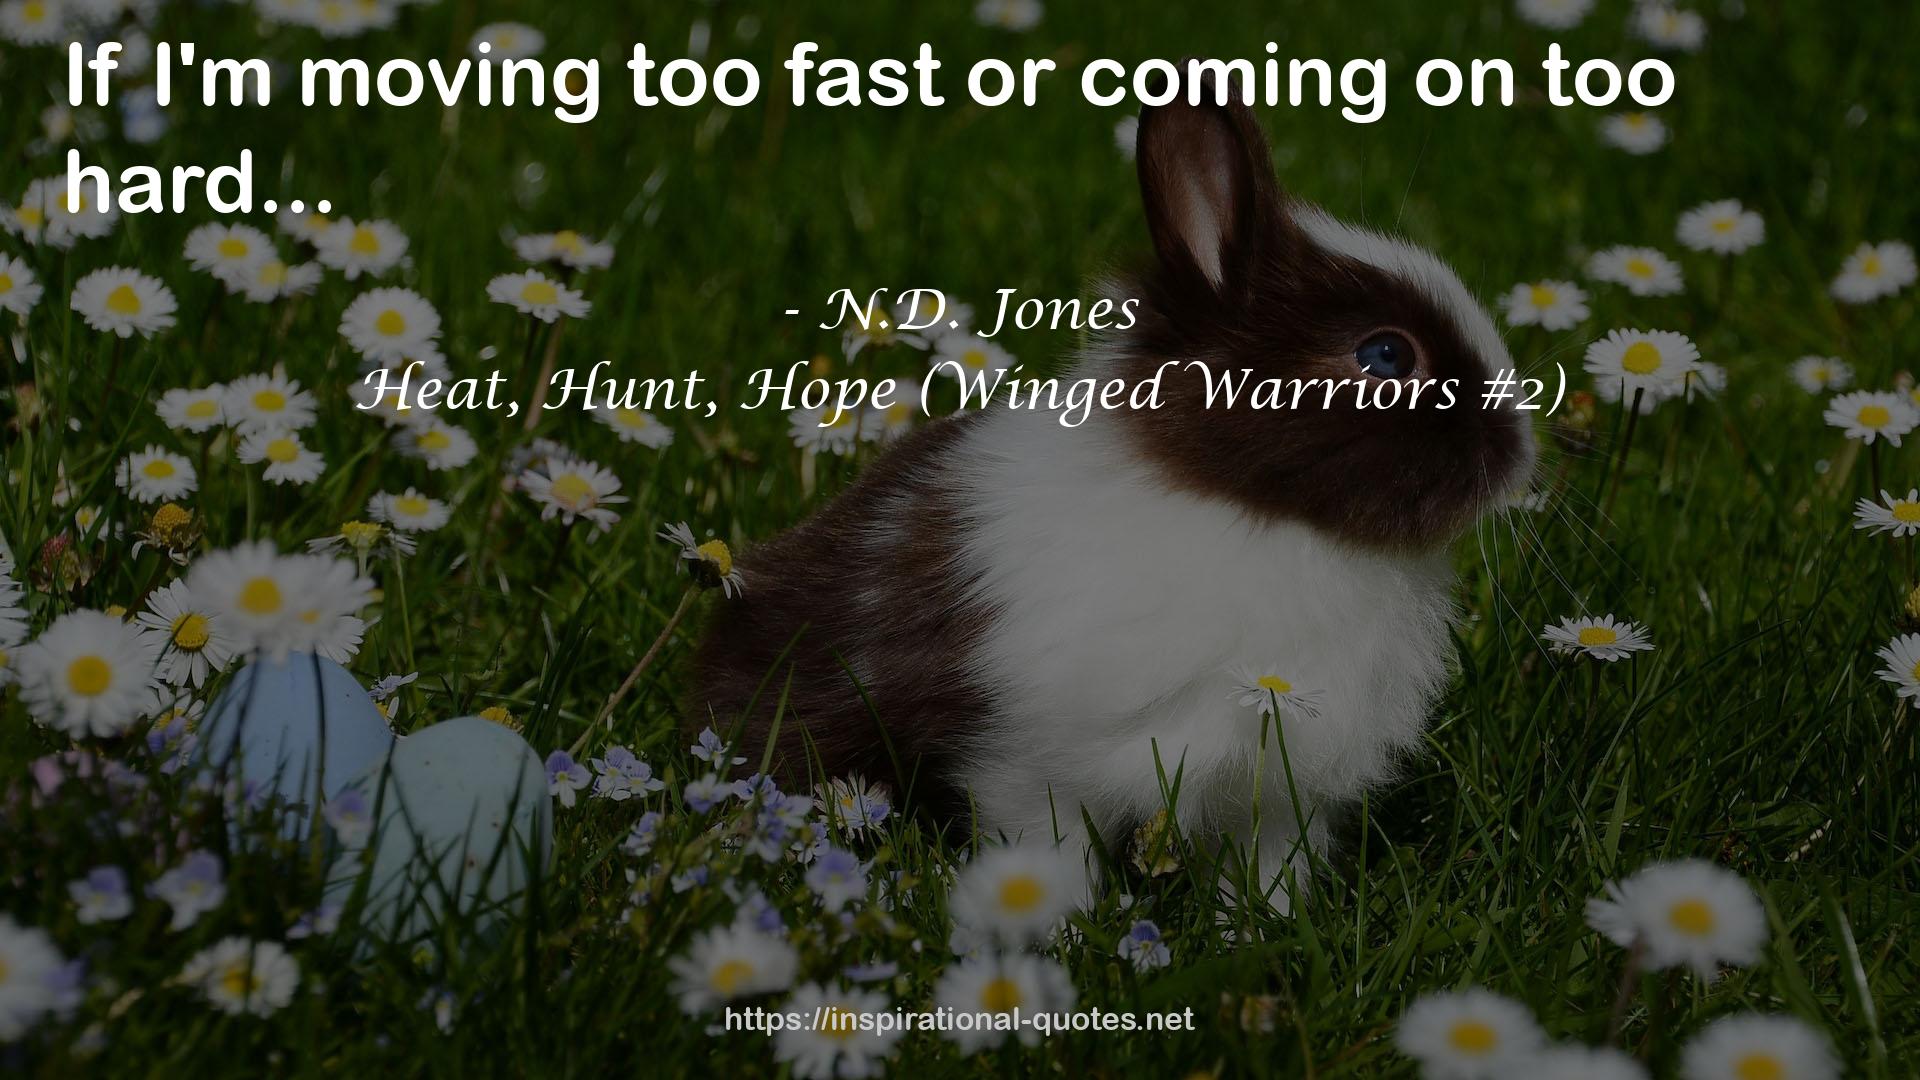 Heat, Hunt, Hope (Winged Warriors #2) QUOTES